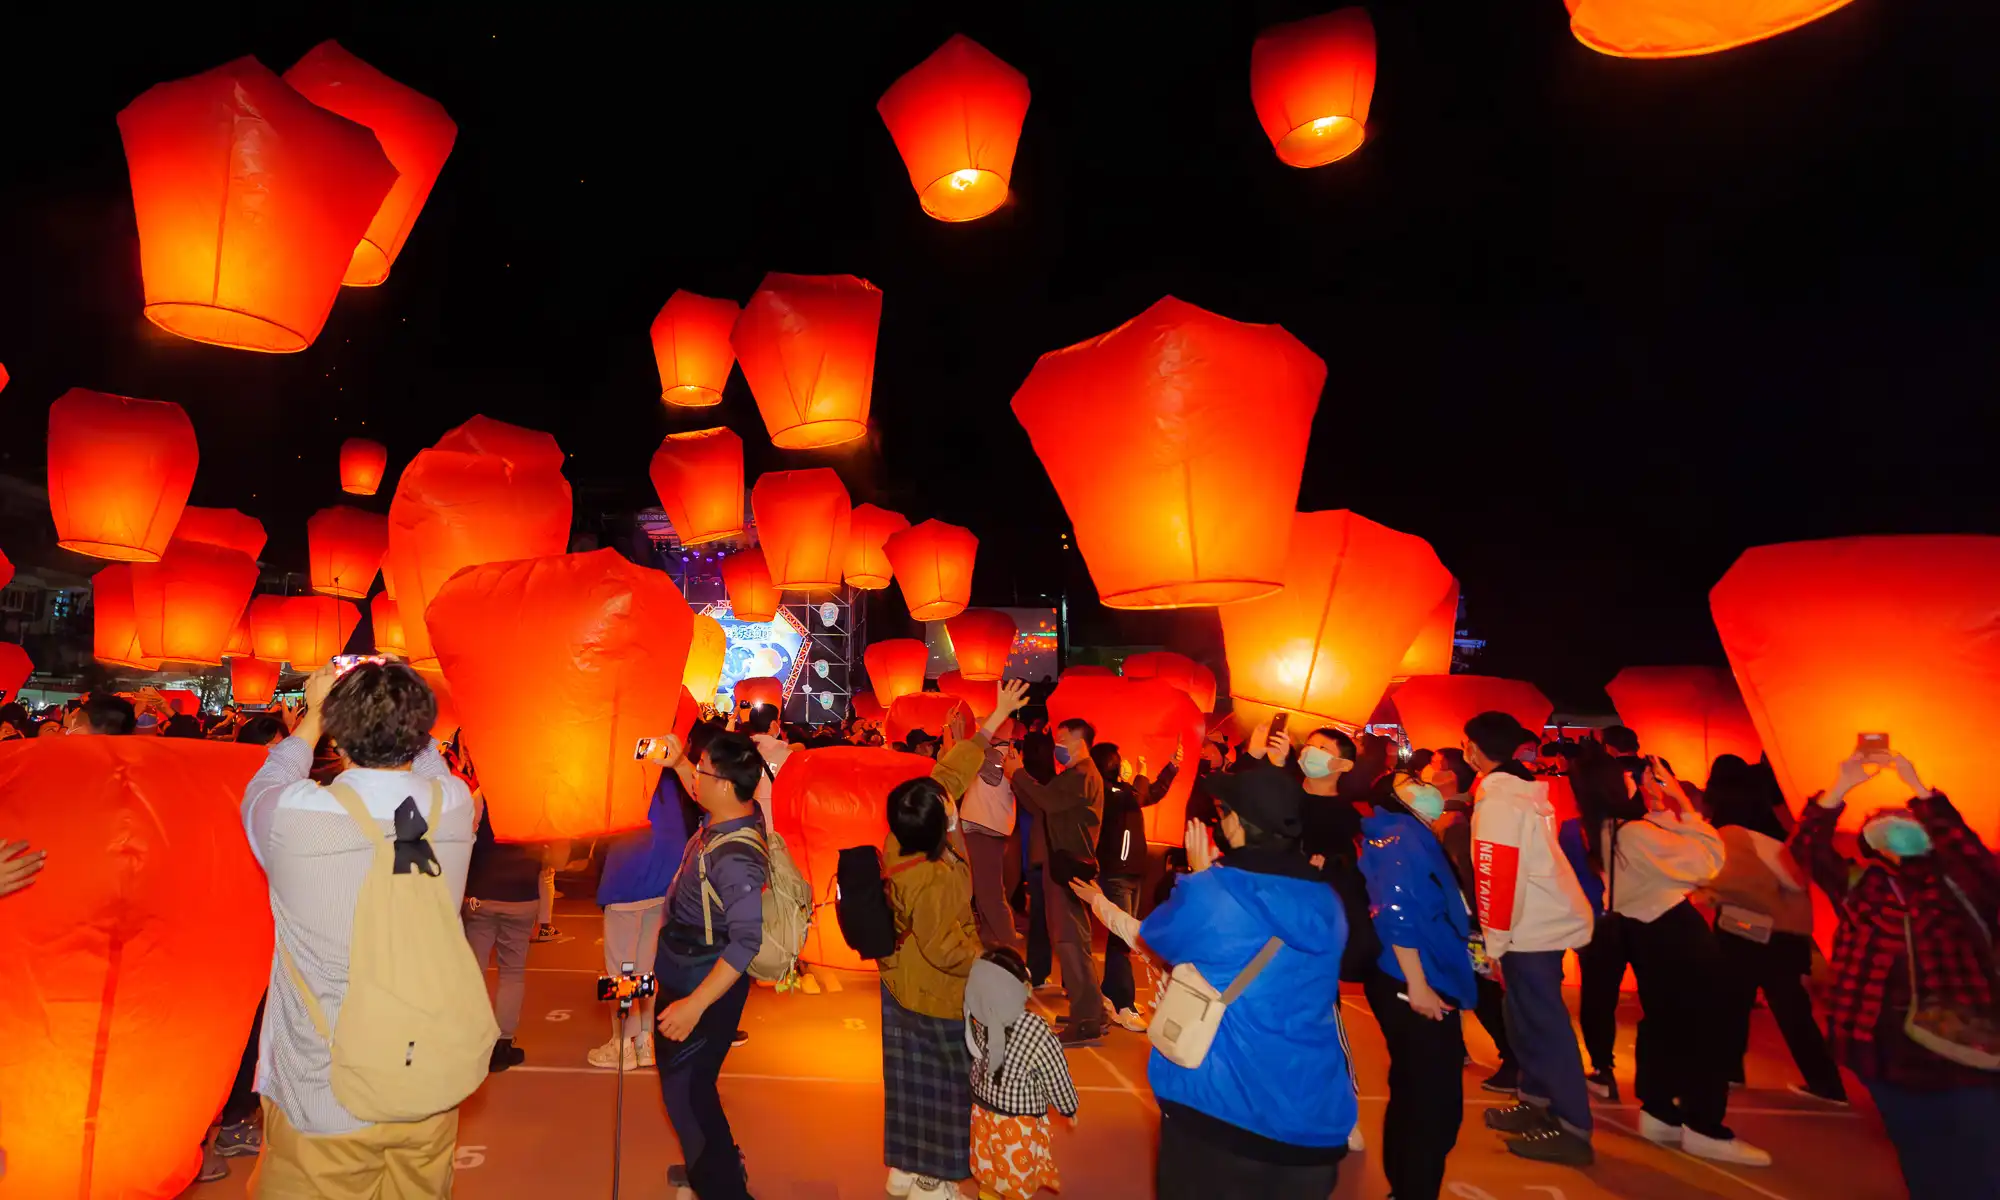 Dozens of red lanterns that are the size of small refrigerators are simultaneously released into the night sky.